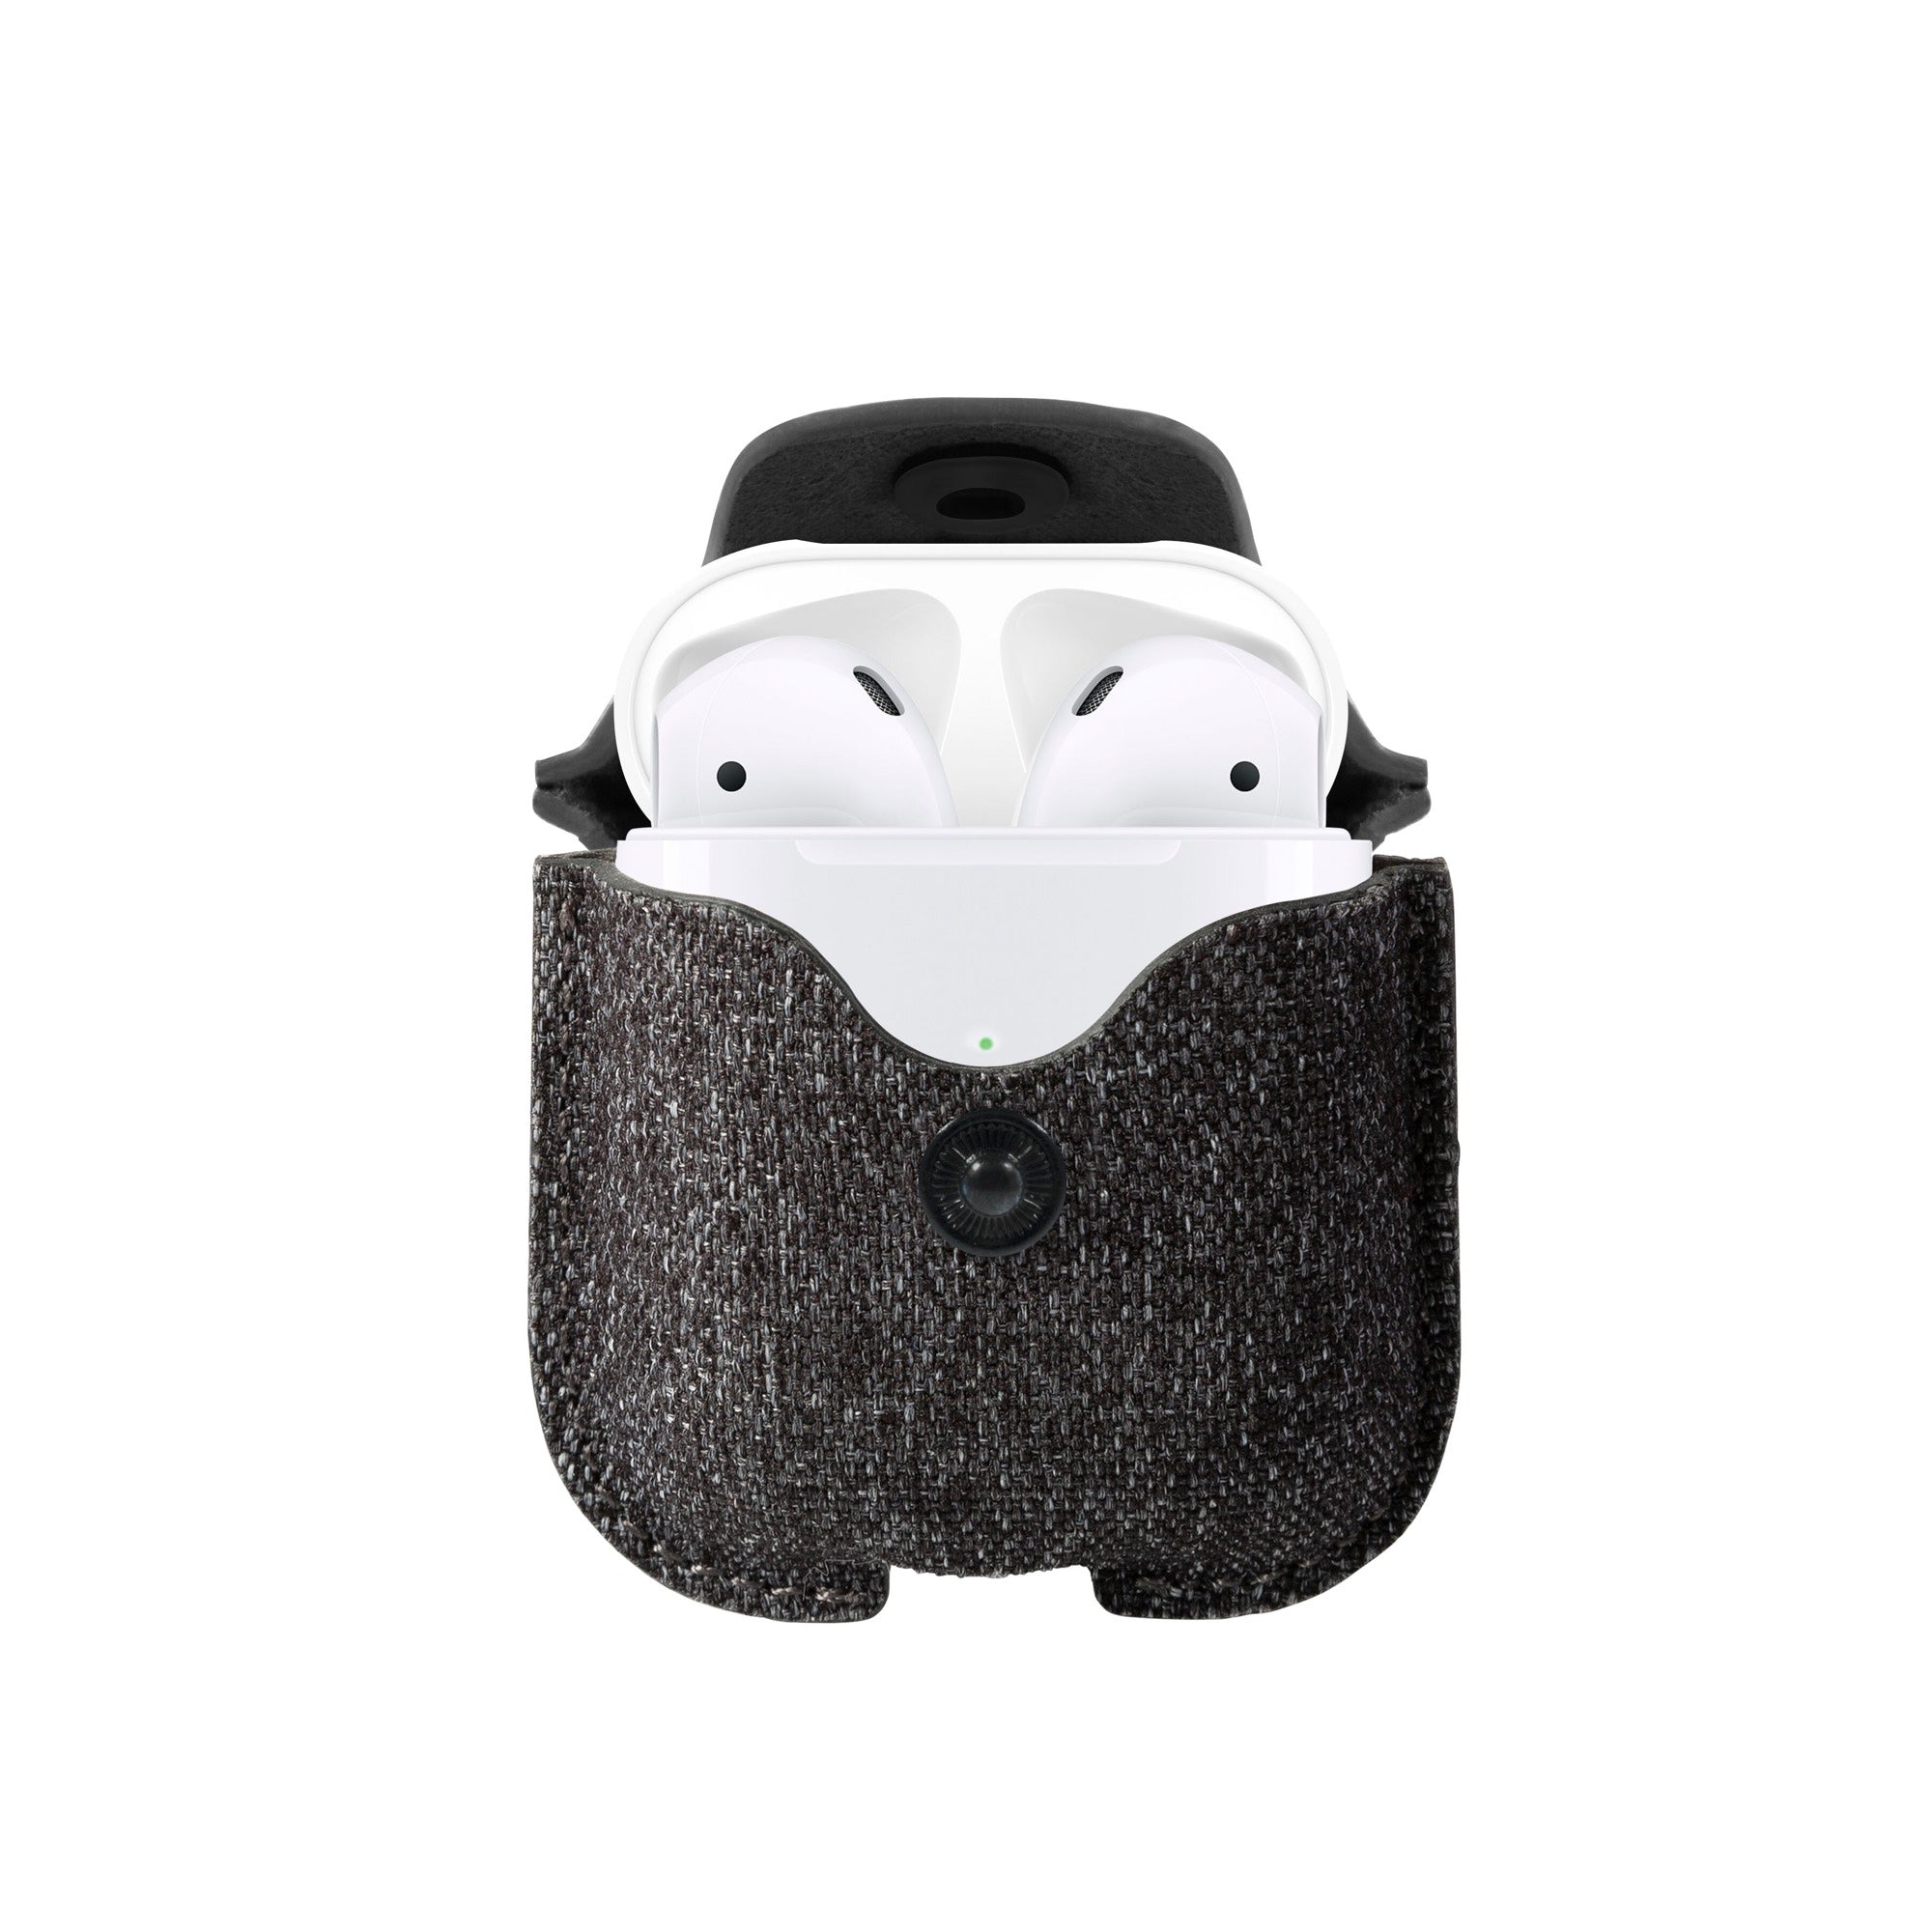 AirSnap Twill for AirPods - Smoke